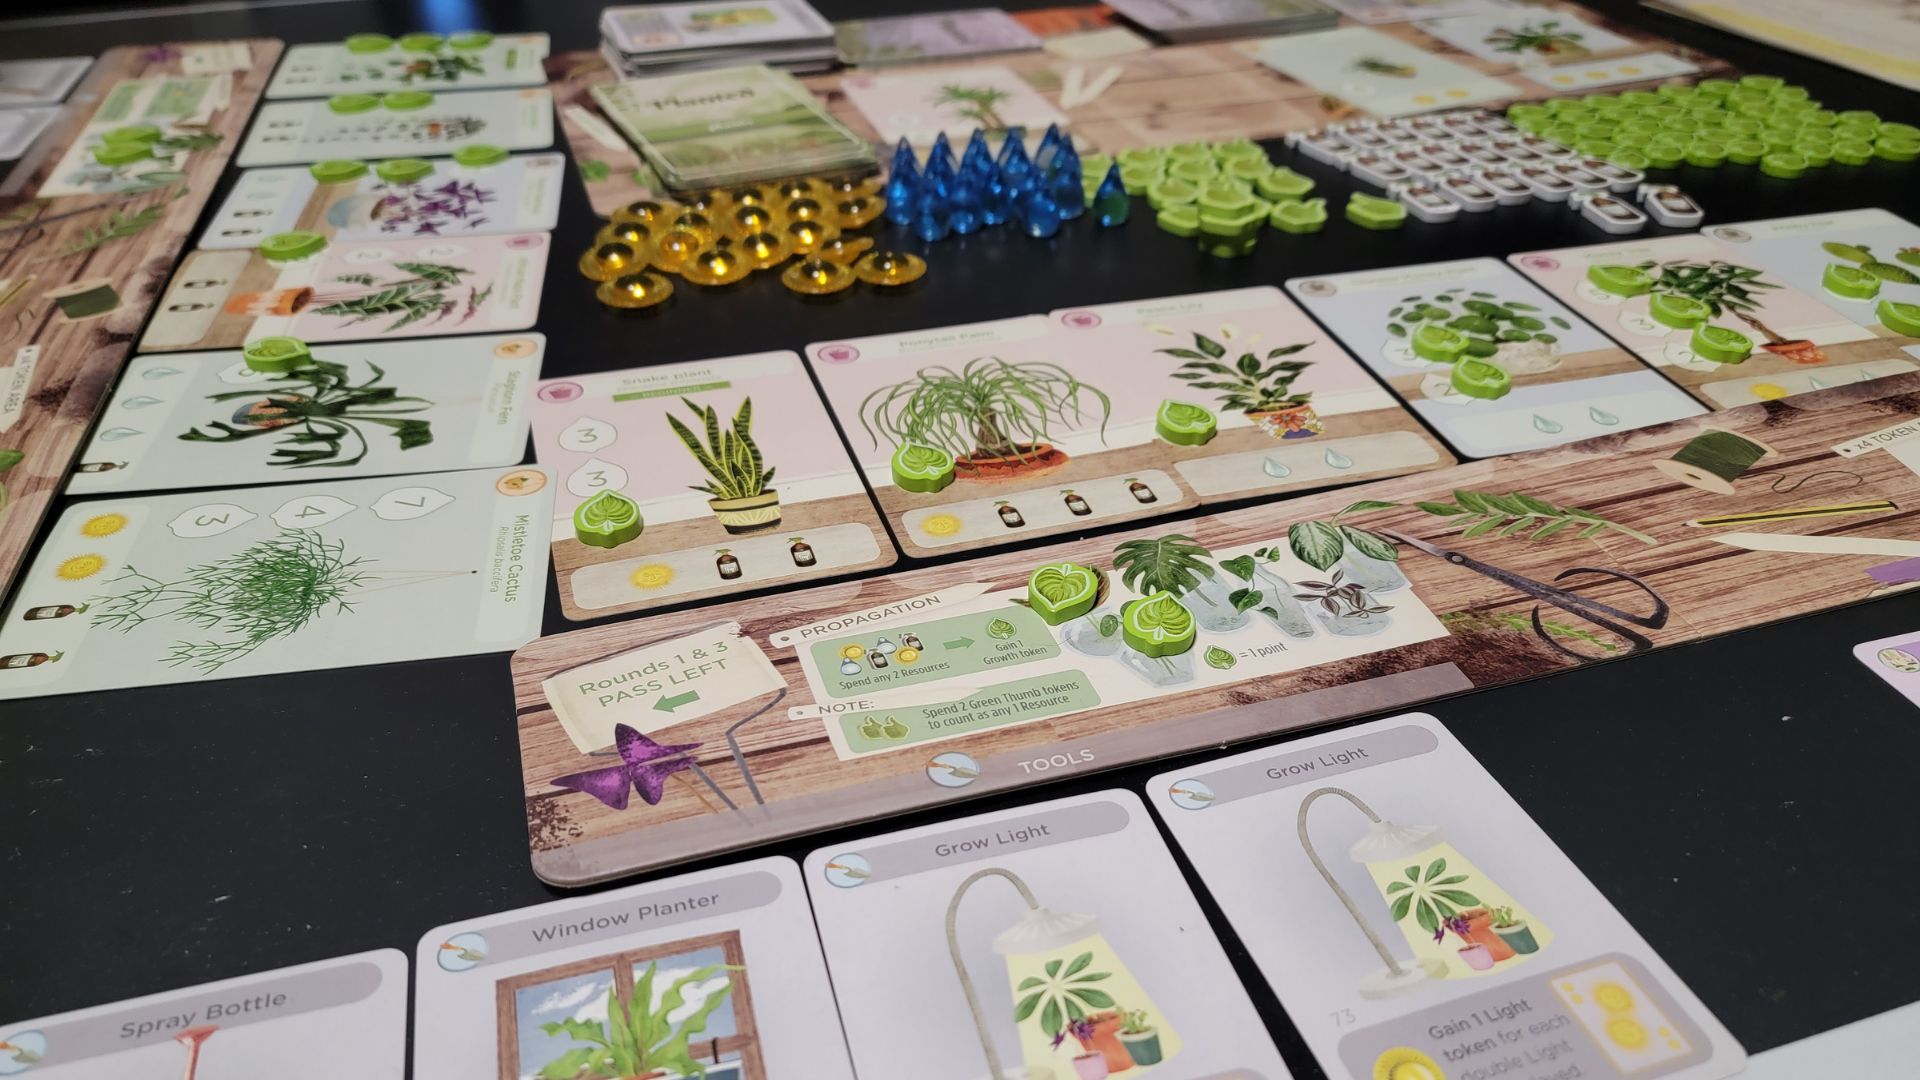 Game of Planted board game in progress